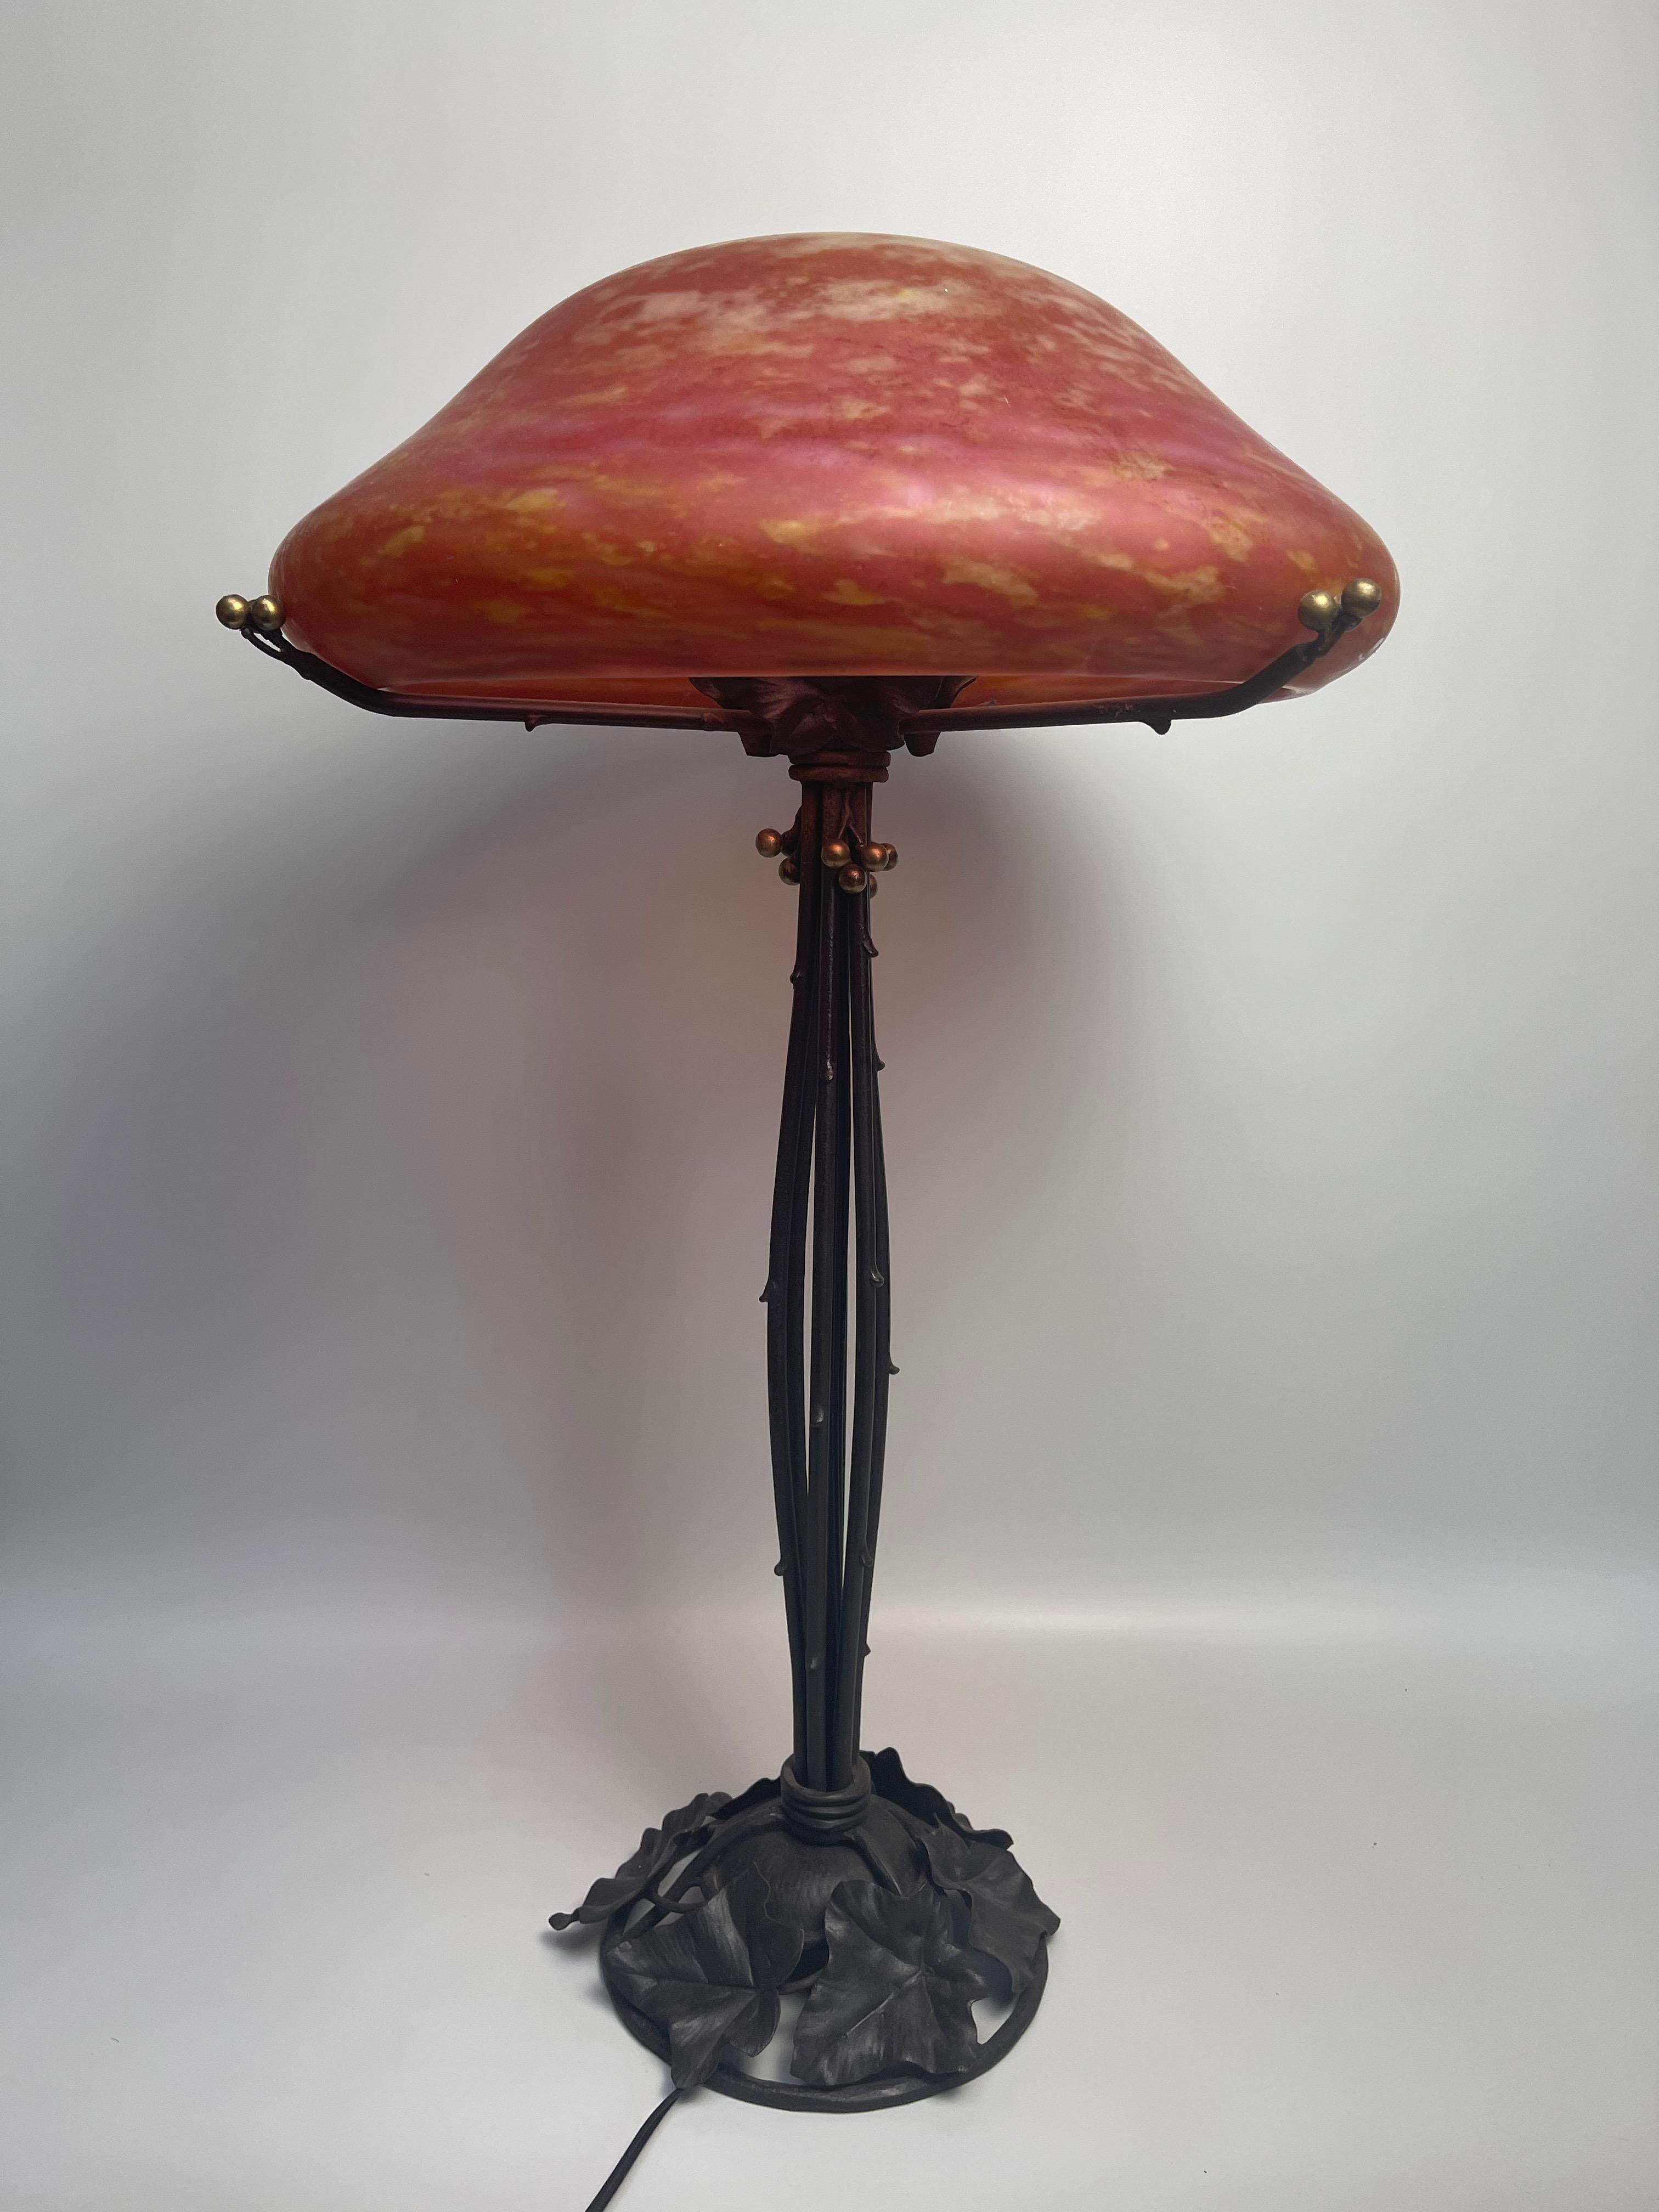 Hammered Large Art Deco Table Lamp by Daum Nancy Wrought Iron Foot